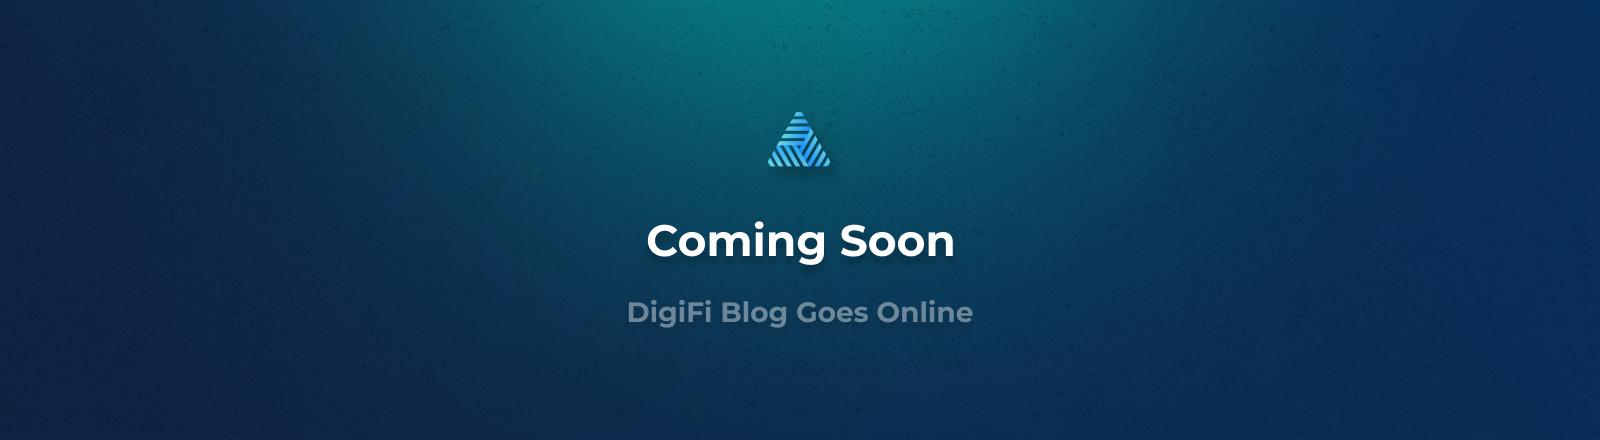 The DigiFi Blog Is Launching Soon!